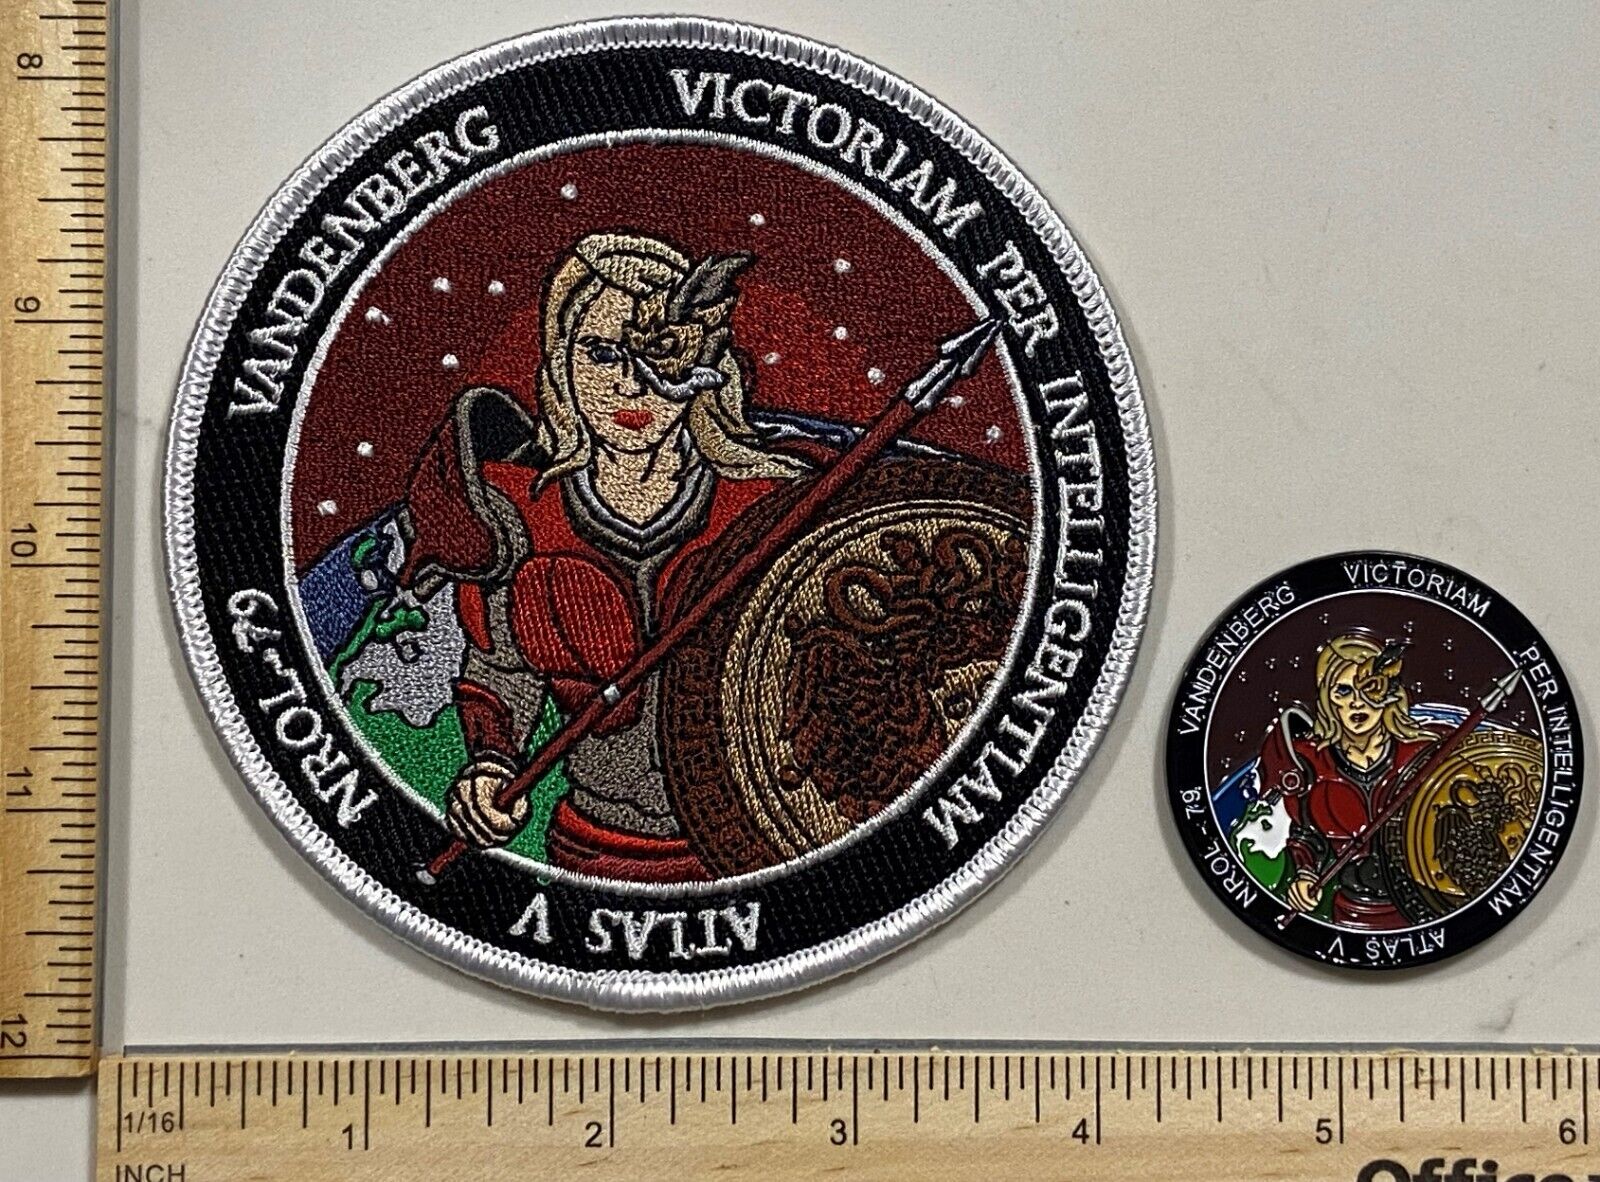 MILITARY BLACK OPS COIN AND PATCH - NROL-79 VER (B) ATHENA GODDESS OF MILITARY